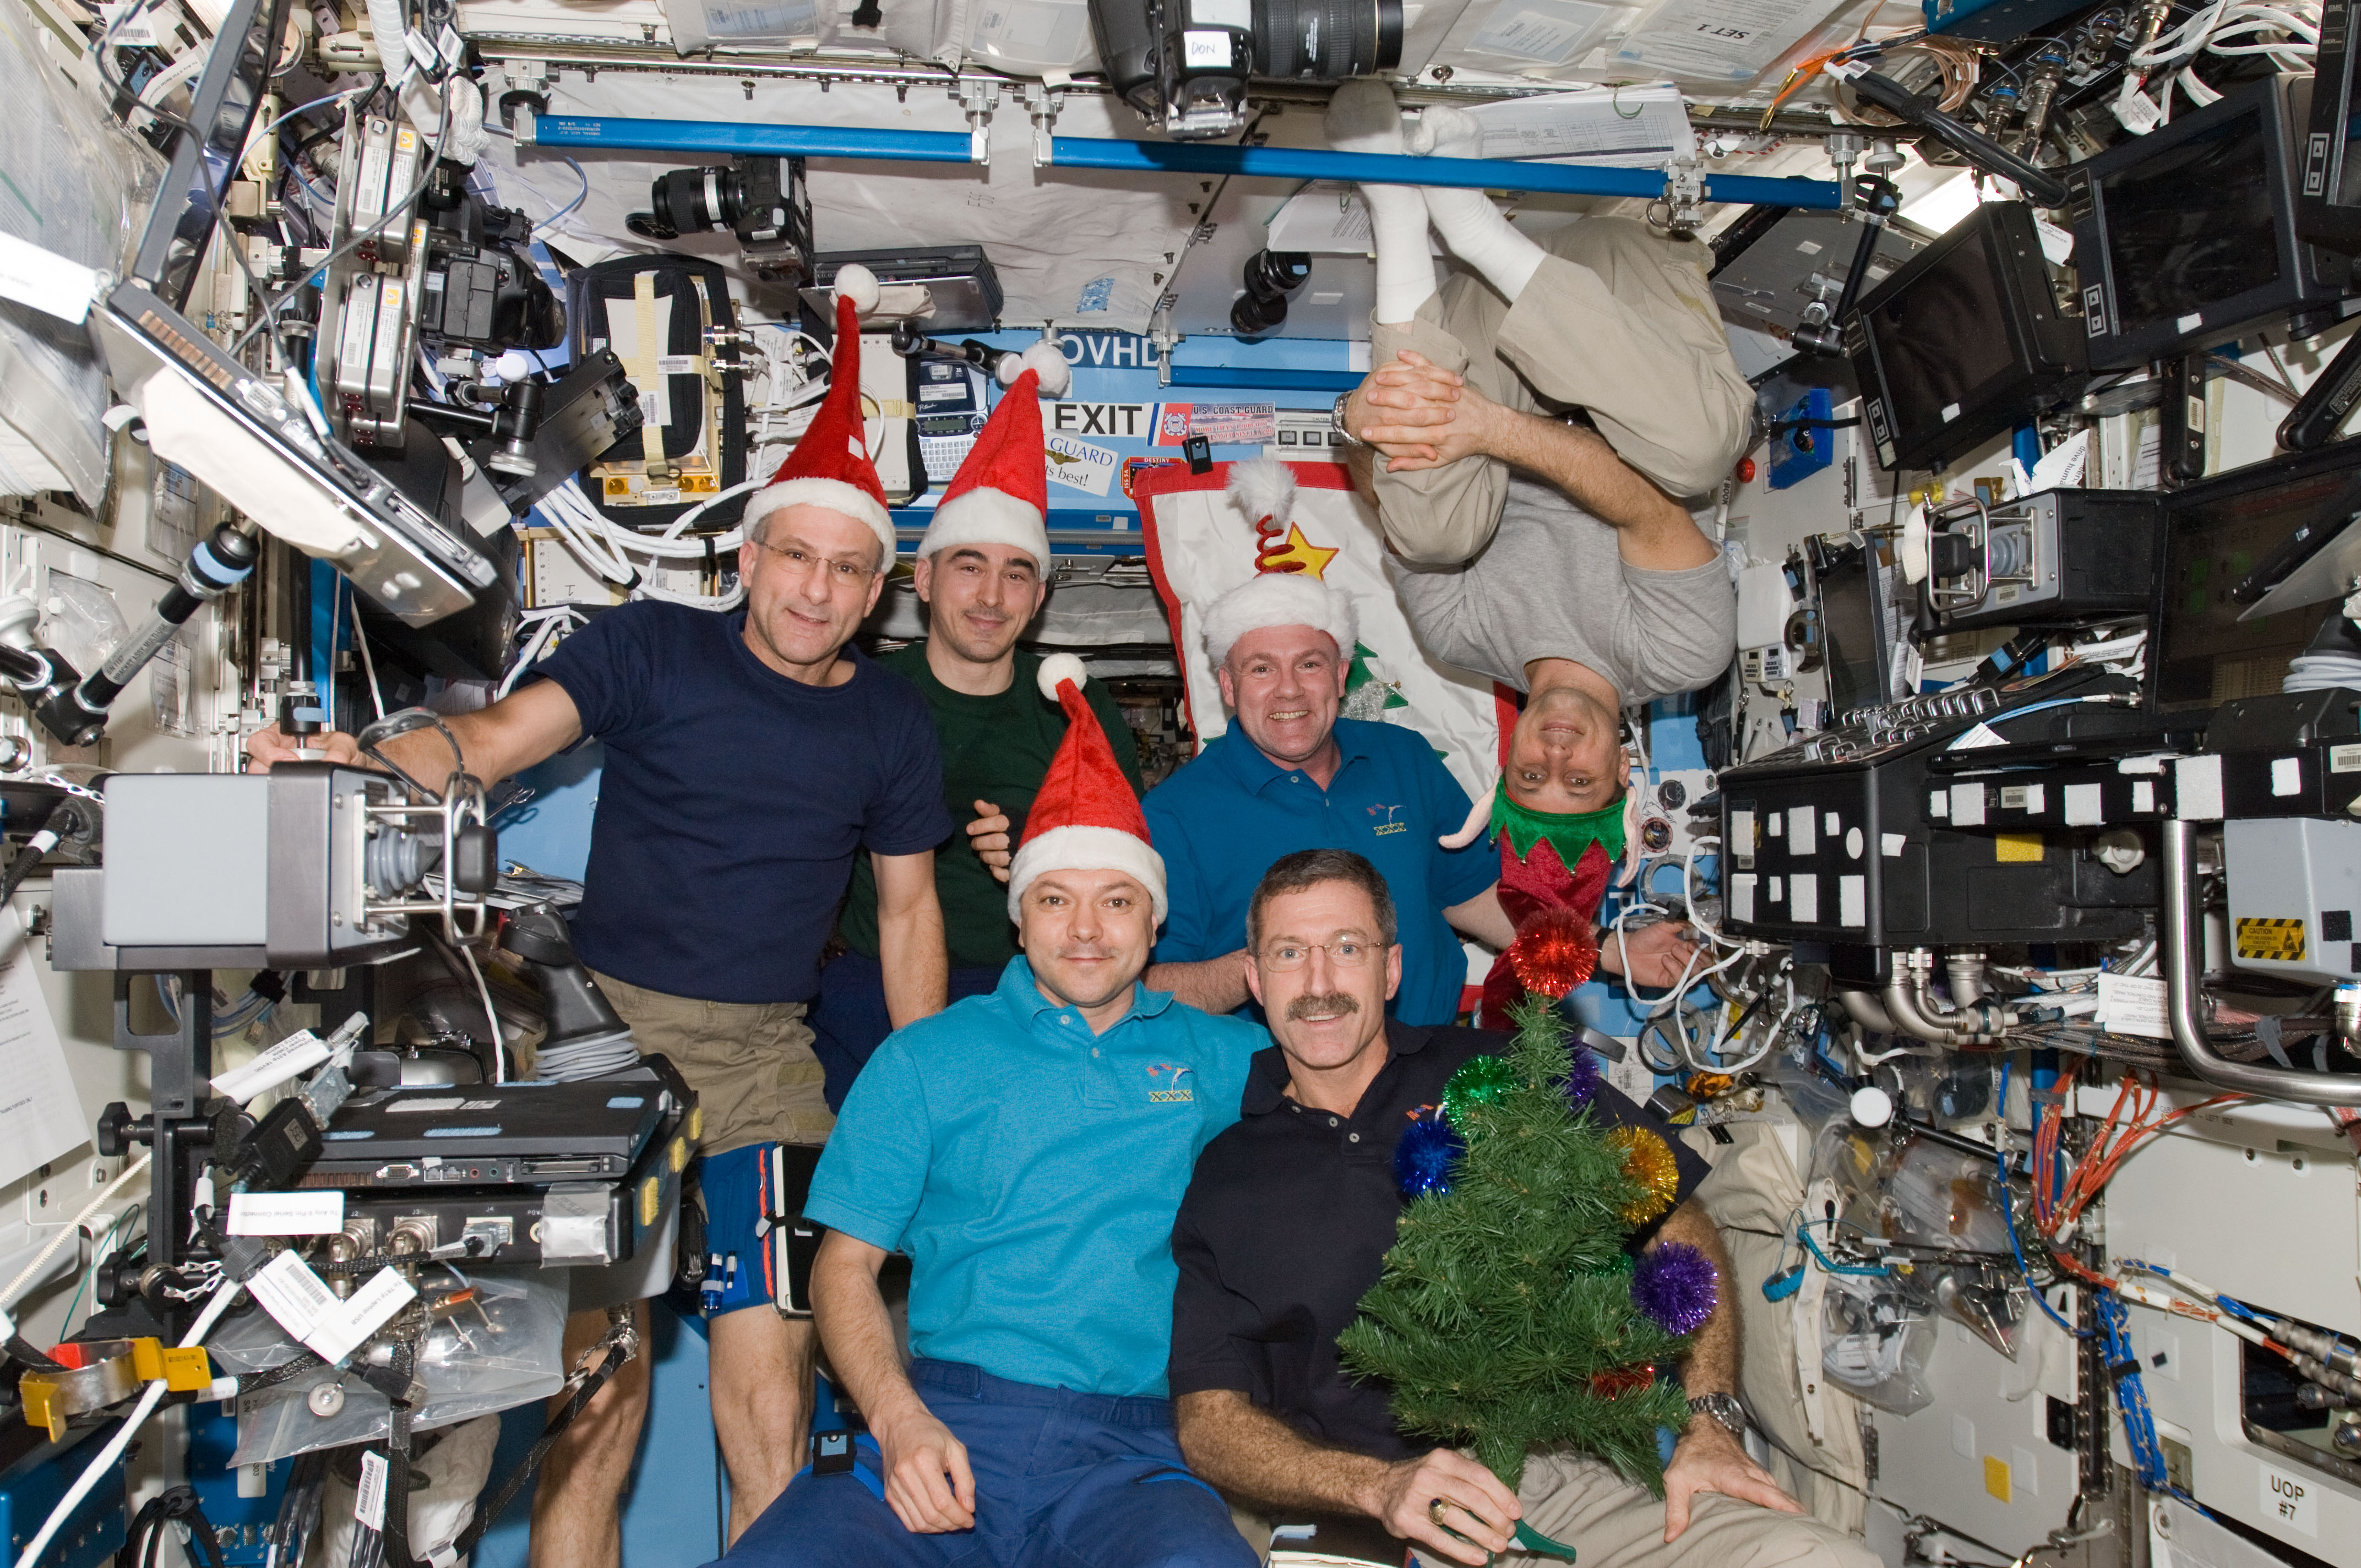 Expedition 30 crew with Santa Claus hats